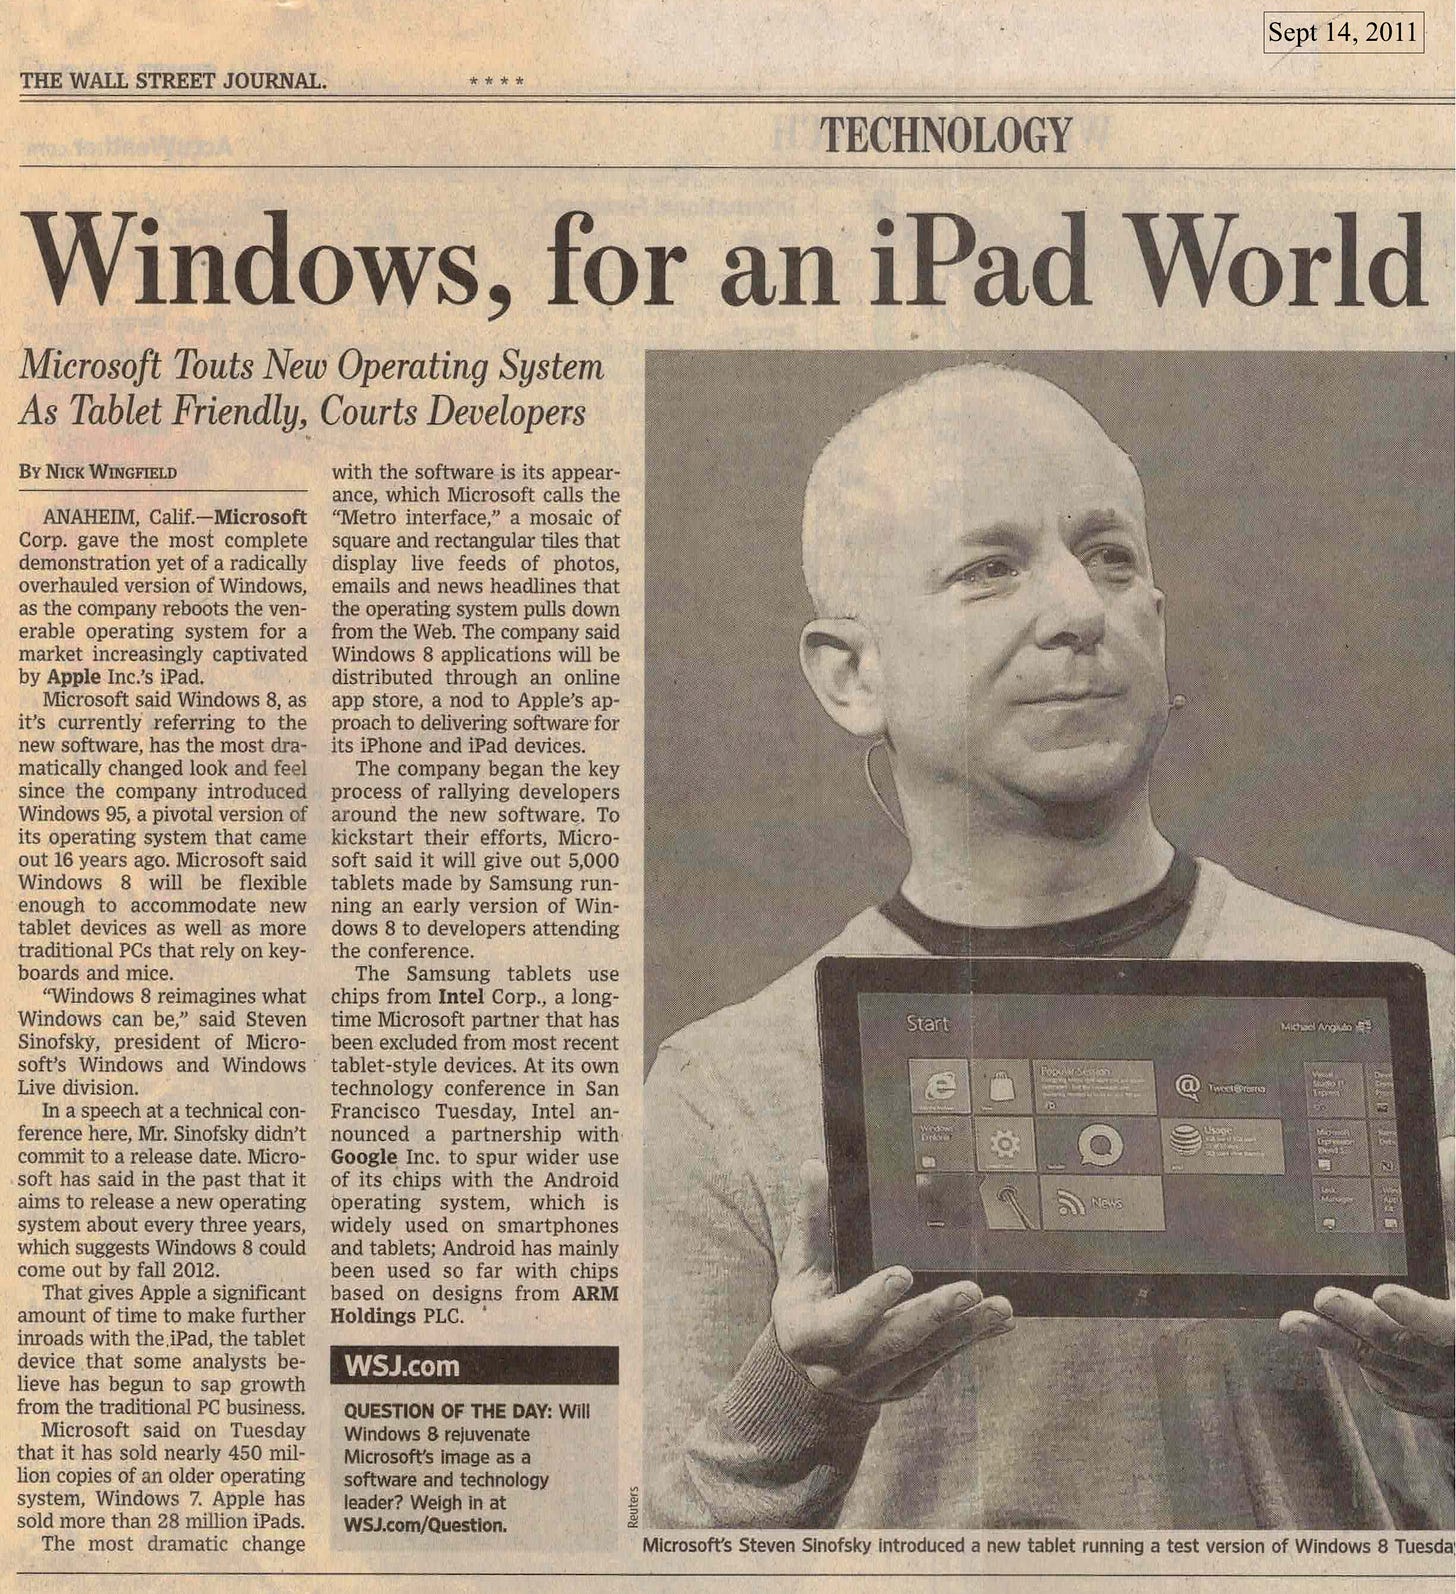 Windows, for an iPad World Microsoft Touts New Operating System As Tablet Friendly, Courts Developers By Nick WINGFIELD with the software is its appear-ance, which Microsoft calls the ANAHEIM, Calif. -Microsoft "Metro interface," a mosaic of Corp. gave the most complete square and rectangular tiles that demonstration yet of a radically display live feeds of photos, overhauled version of Windows, emails and news headlines that as the company reboots the ven- the operating system pulls down erable operating system for a from the Web. The company said market increasingly captivated Windows 8 applications will be by Apple Incis iPad. distributed through an online Microsoft said Windows 8, as app store, a nod to Apple's ap-it's currently referring to the proach to delivering software for new software, has the most dra- its iPhone and iPad devices. matically changed look and feel The company began the key since the company introduced process of rallying developers Windows 95, a pivotal version of around the new software. To its operating system that came kickstart their efforts, Micro-out 16 years ago. Microsoft said soft said it will give out 5,000 Windows 8 will be flexible tablets made by Samsung run-enough to accommodate new ning an early version of Win-tablet devices as well as more dows 8 to developers attending traditional PCs that rely on key- the conference. boards and mice. The Samsung tablets use "Windows 8 reimagines what chips from Intel Corp., a long- Windows can be," said Steven time Microsoft partner that has Sinofsky, president of Micro- been excluded from most recent soft's Windows and Windows tablet-style devices. At its own Live division. technology conference in San In a speech at a technical con- Francisco Tuesday, Intel an-ference here, Mr. Sinofsky didn't nounced a partnership with commit to a release date. Micro- Google Inc. to spur wider use soft has said in the past that it of its chips with the Android aims to release a new operating operating system, which is system about every three years, widely used on smartphones which suggests Windows 8 could and tablets; Android has mainly come out by fall 2012. been used so far with chips That gives Apple a significant based on designs from ARM amount of time to make further Holdings PLC. inroads with the iPad, the tablet device that some analysts be- WSJ.com lieve has begun to sap growth from the traditional PC business. Microsoft said on Tuesday that it has sold nearly 450 million copies of an older operating system, Windows 7. Apple has